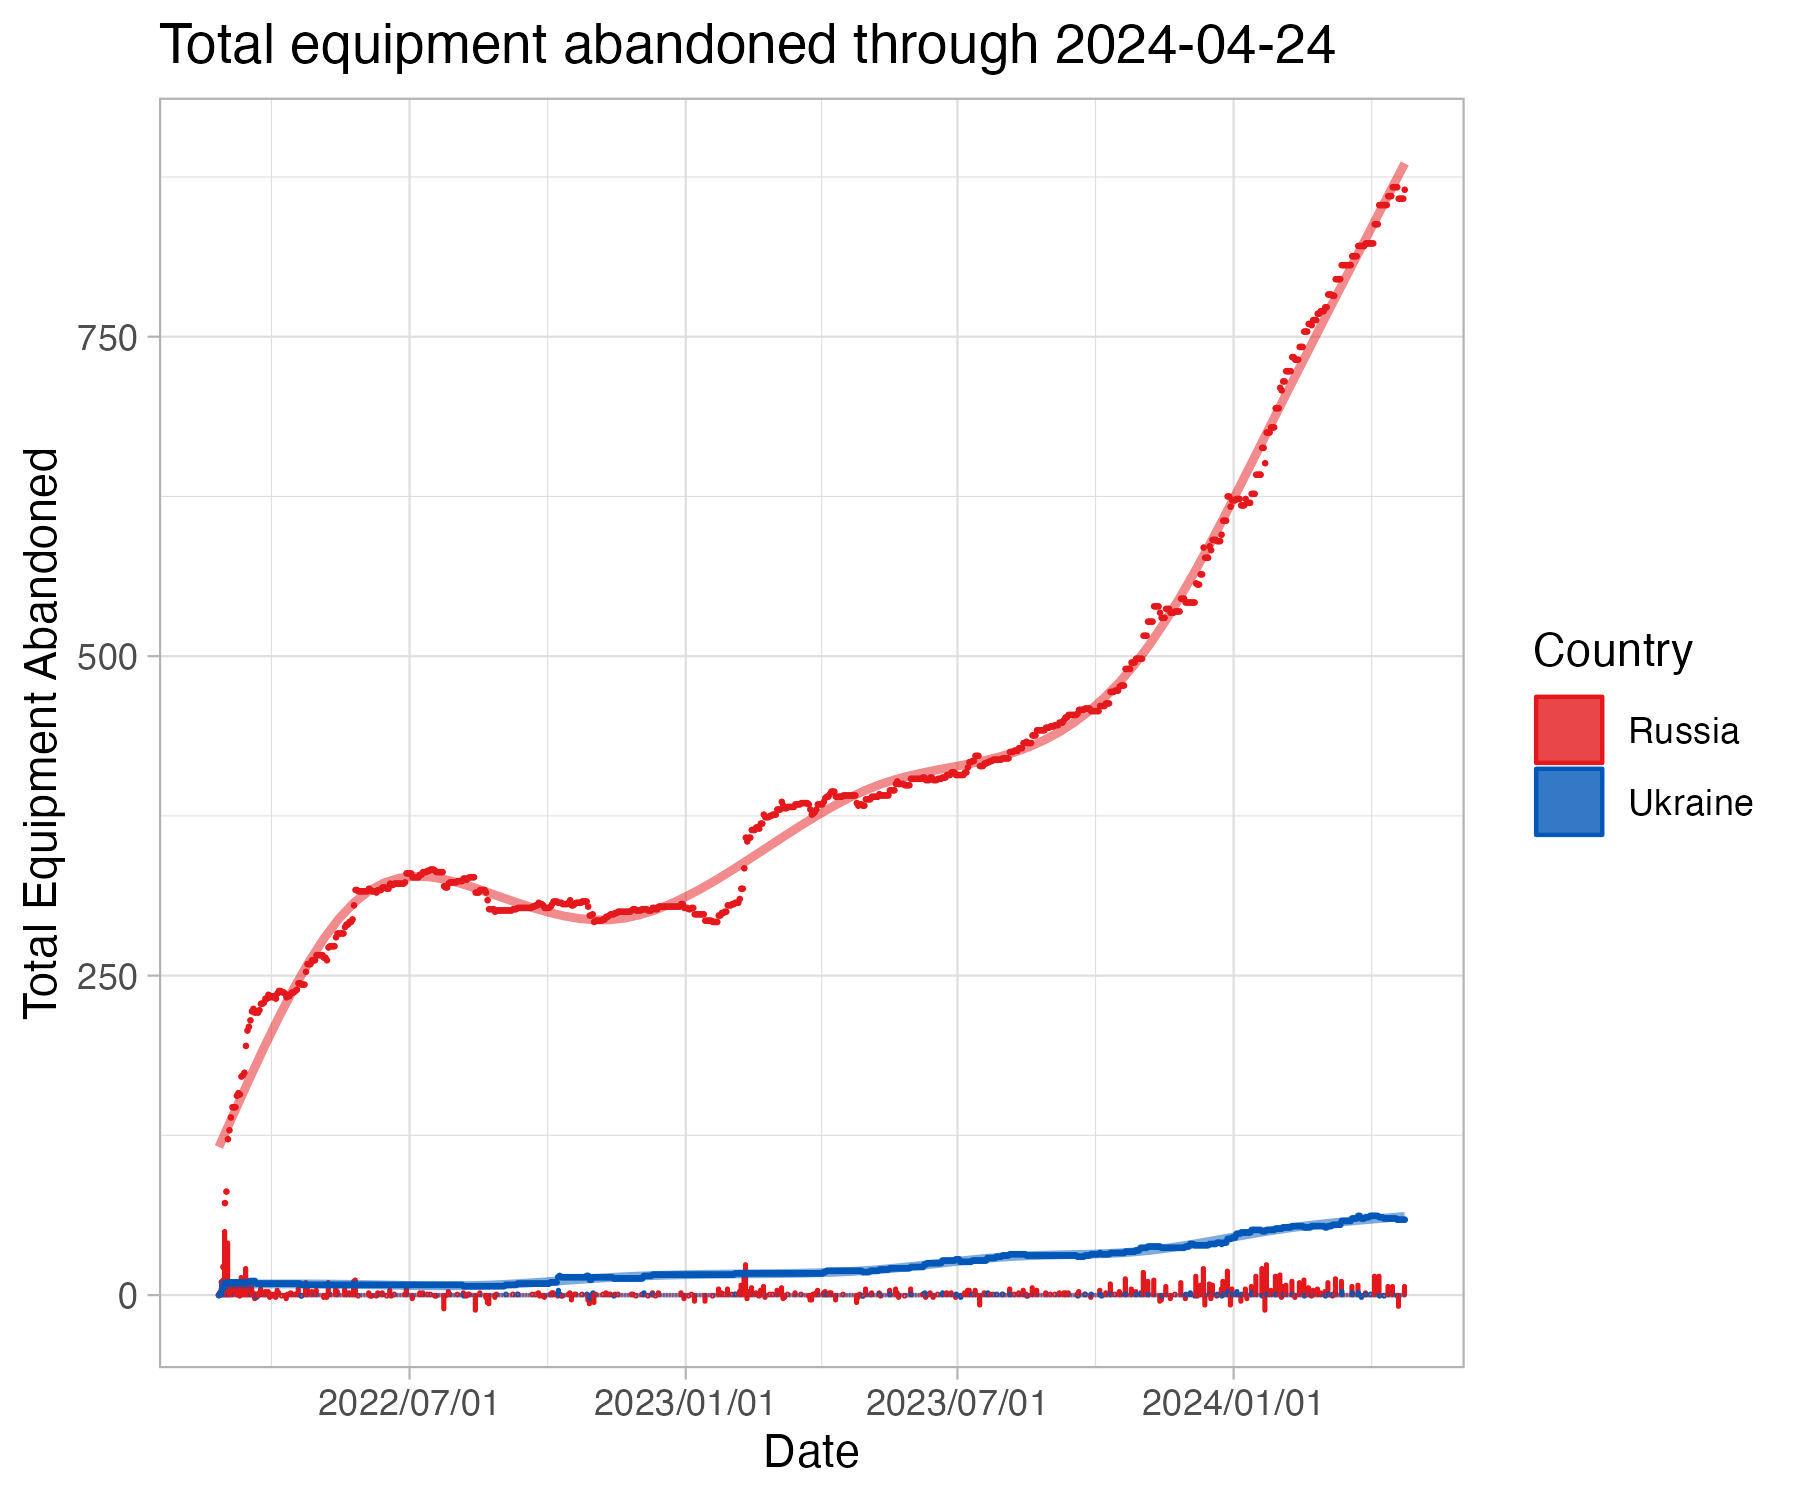 Total equipment abandoned through 2024-04-24